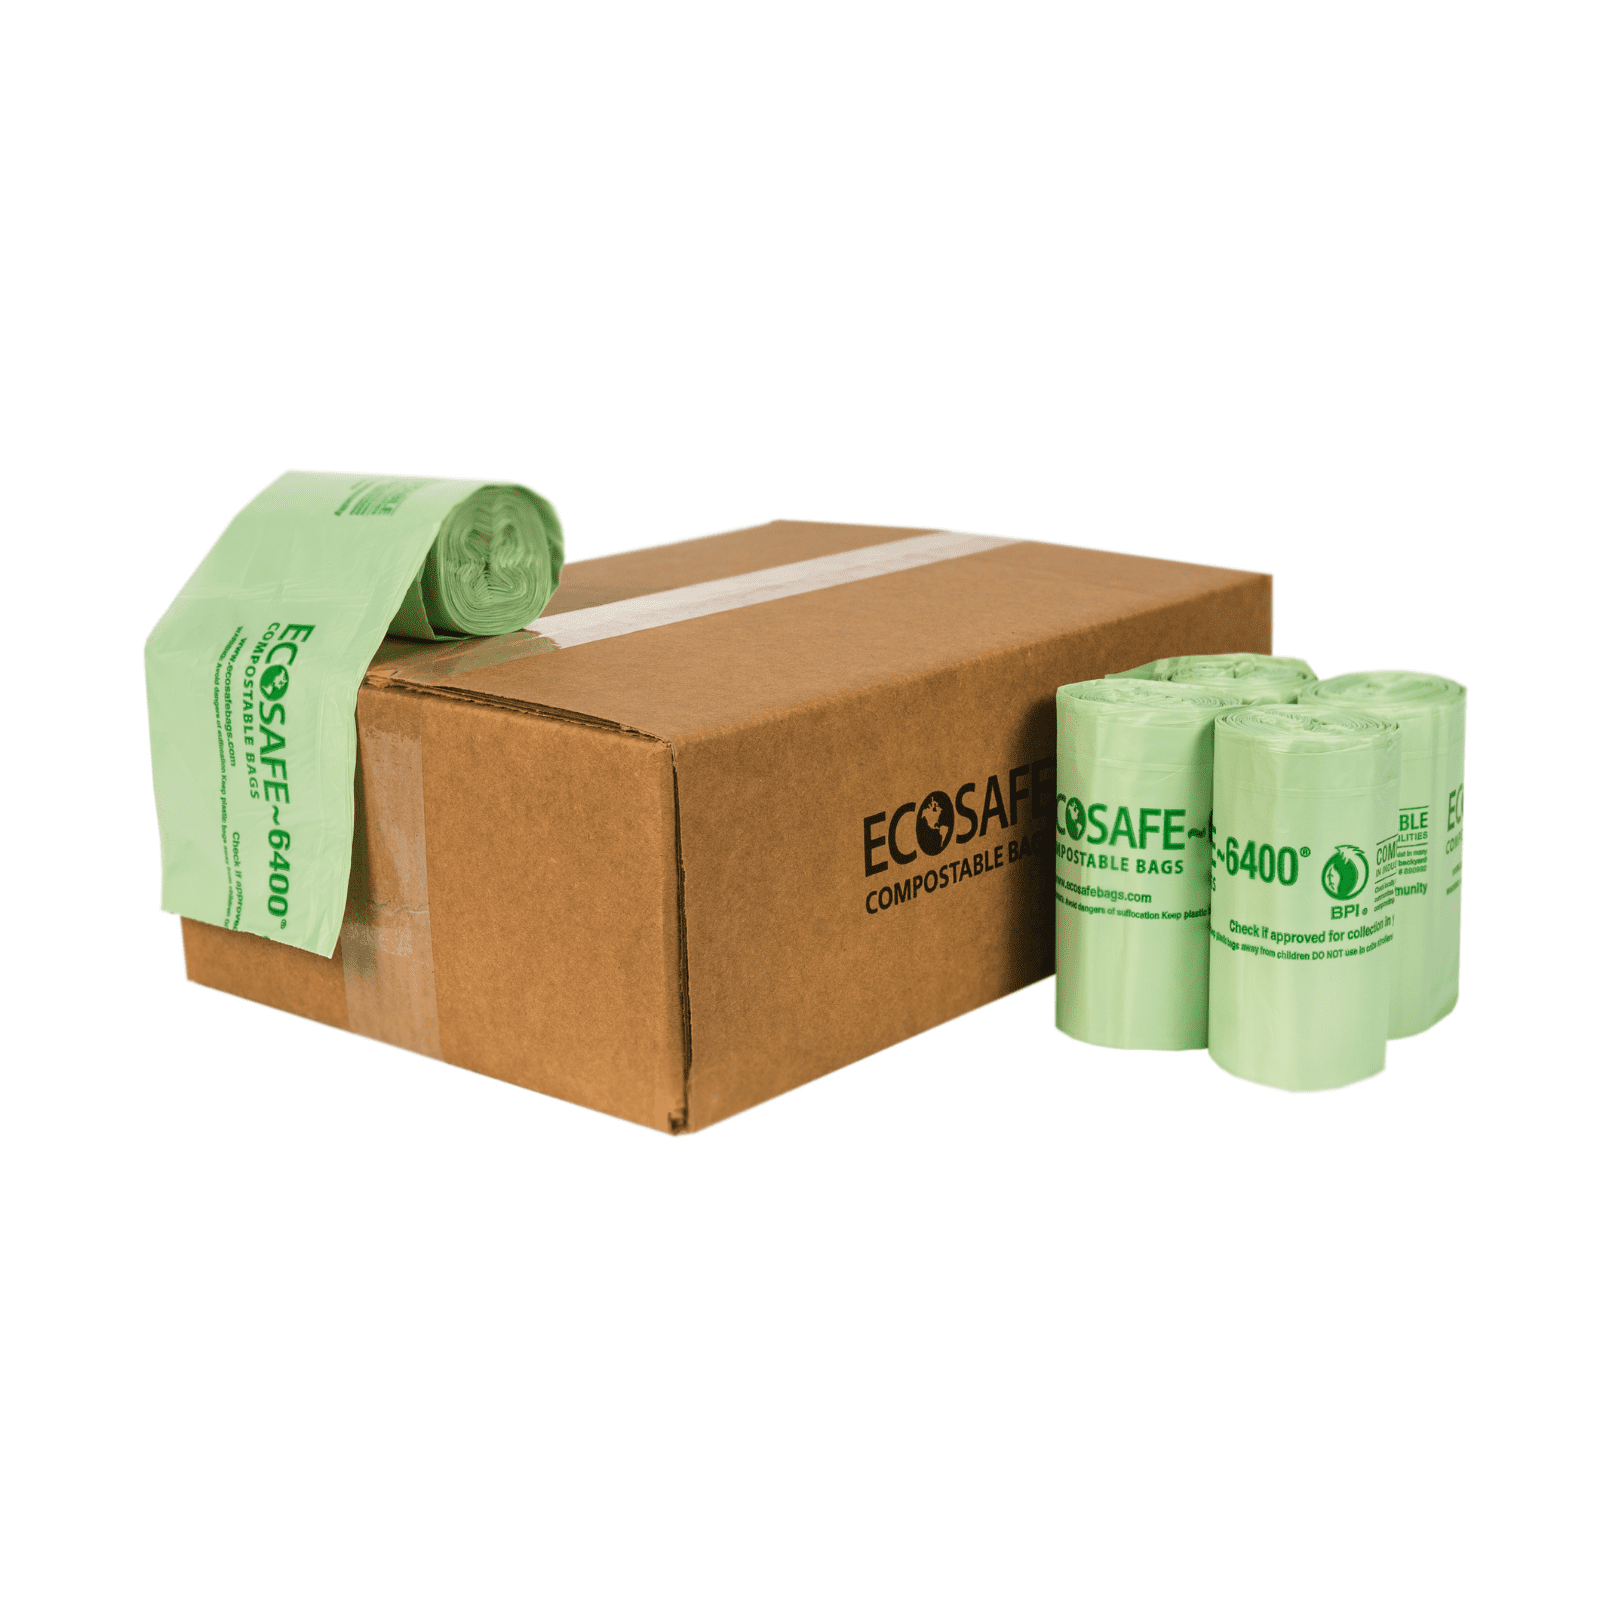 EcoSafe 18.25x25 Compostable Bags/Liners